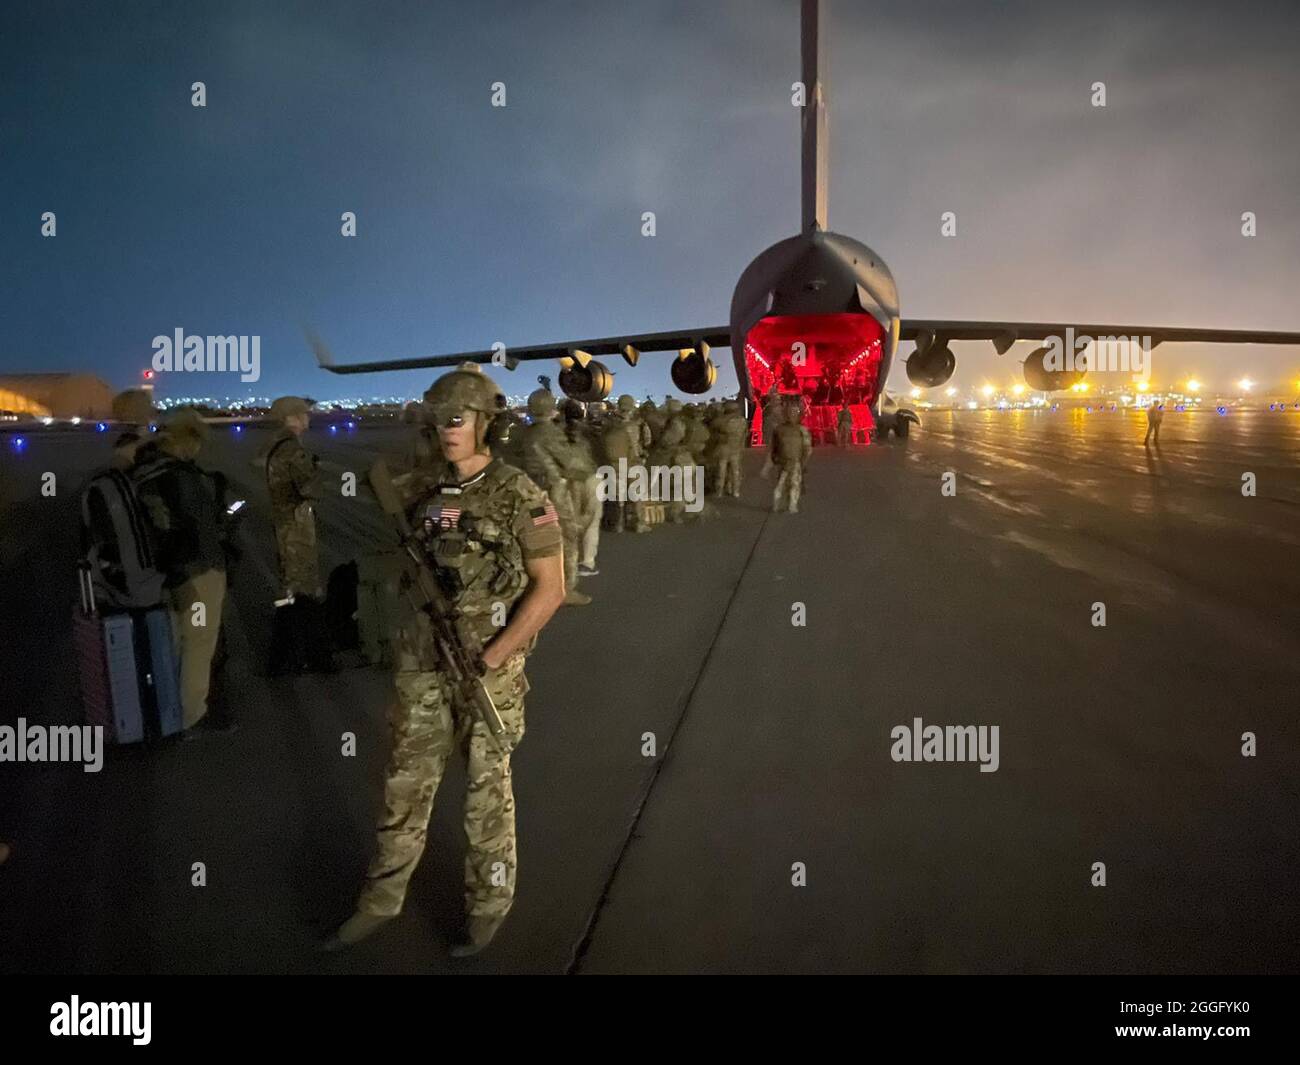 Paratroopers assigned to the 82nd Airborne Division prepare to board a U.S. Air Force C-17 on August 30th, 2021 at the Hamid Karzai International Airport. Maj. Gen. Donahue was the last American Soldier to leave Afghanistan ending the U.S. mission in Kabul. (U.S. Army photo by Master Sgt. Alexander Burnett, 82nd Airborne Public Affairs). Stock Photo